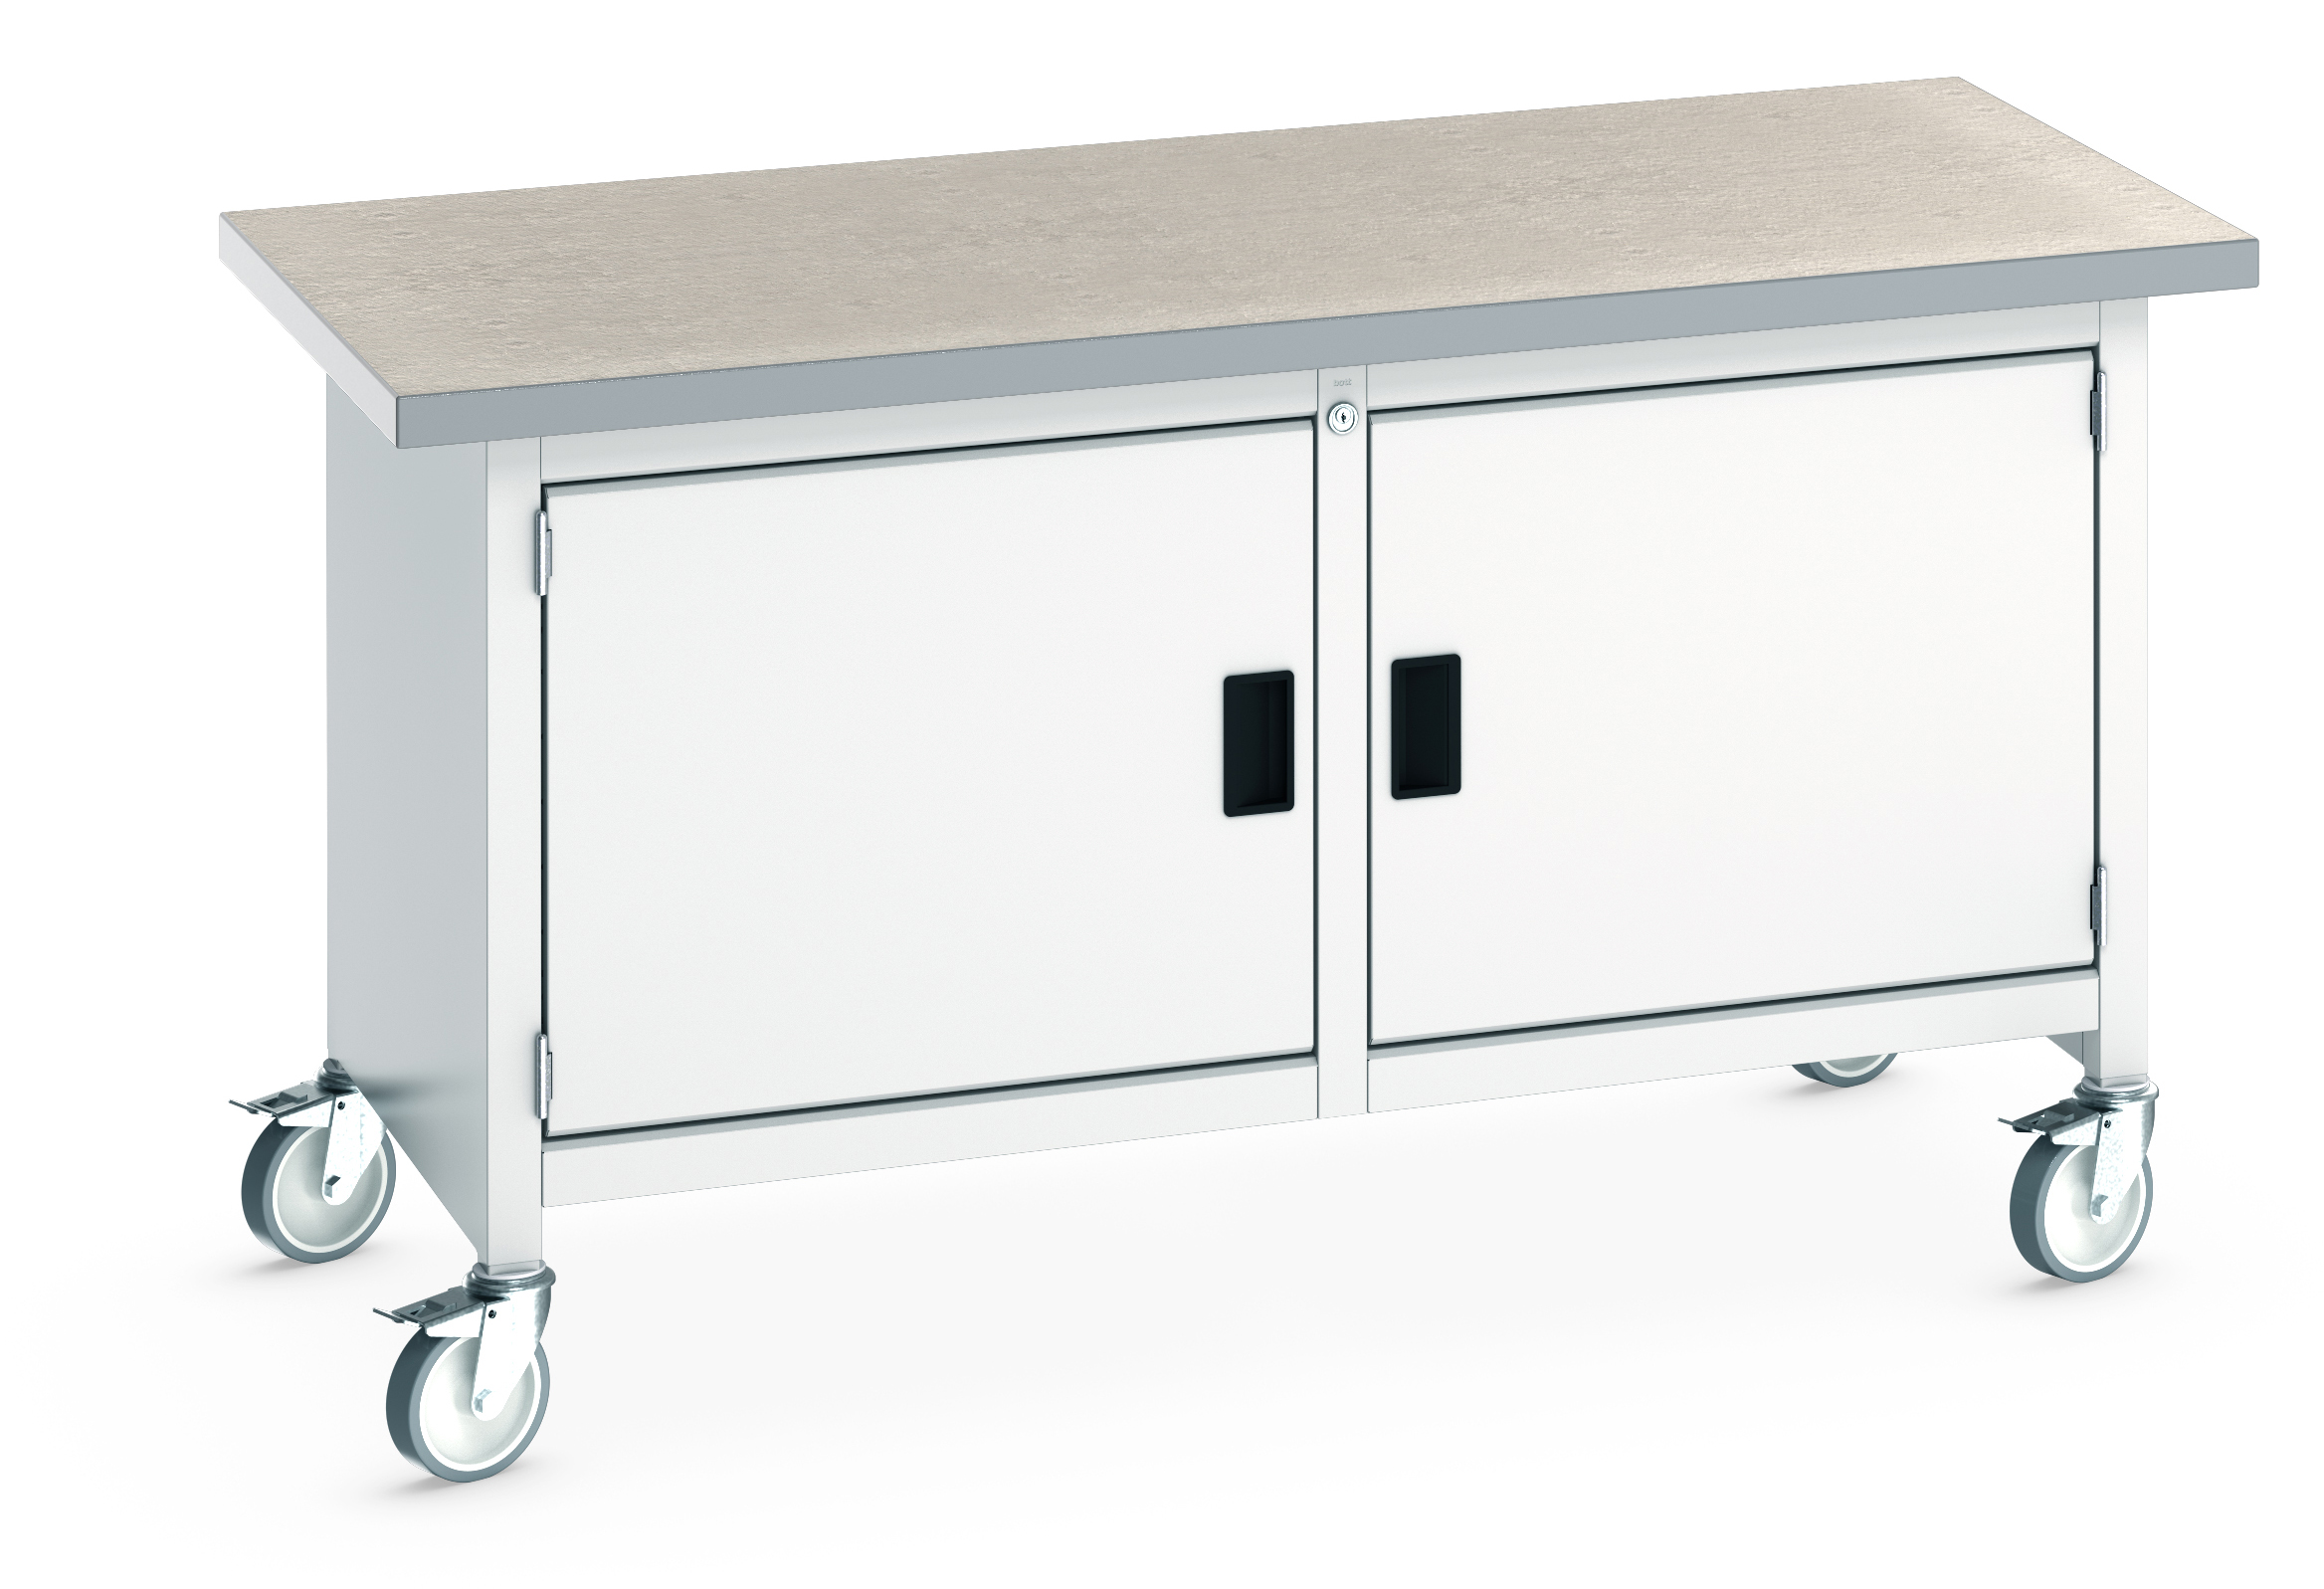 Bott Cubio Mobile Storage Bench With Full Cupboard / Full Cupboard - 41002099.16V